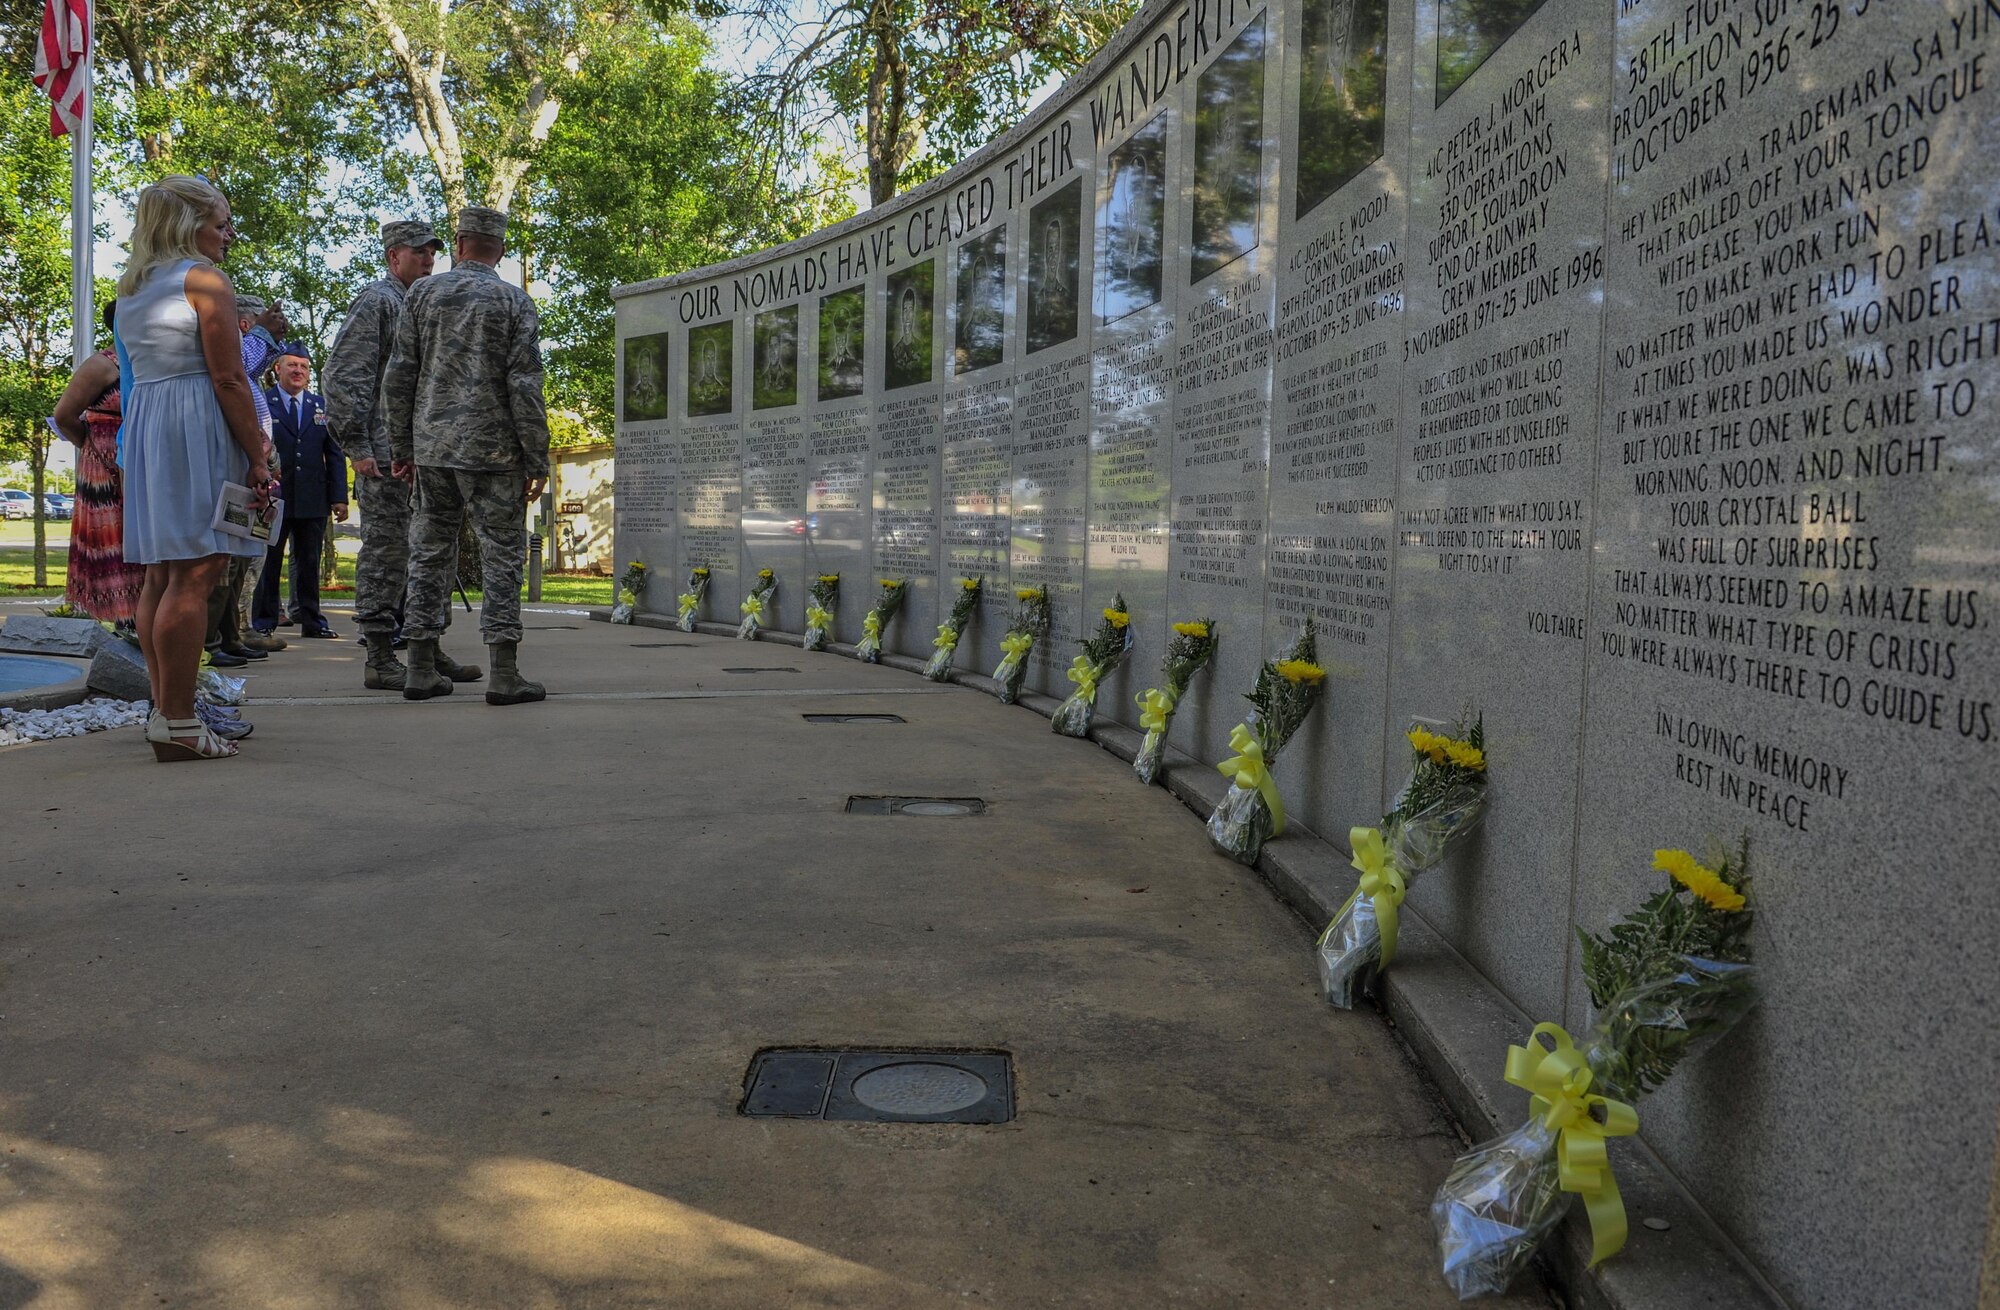 Members of the 33rd Fighter Wing, family and friends of those killed during the Khobar Towers terrorist attack pay their respects during a memorial ceremony, June 25, 2015, on Eglin Air Force Base, Florida. On June 25, 1996, a truck-bomb was detonated adjacent to Khobar Tower in Dhahran, Saudi Arabia, that resulted in 400 injured U.S. and international military and civilian members. The 12 Nomads honored at the ceremony were members of the 58th Fighter Squadron, 60th Fighter Squadron, 33rd Logistics Group, 33rd Maintenance Squadron and the 33rd Operations Support Squadron. They represented a cross-section of the wing as crew chiefs, expeditors, weapons loaders, mechanics, production superintendents, program managers and technicians. The memorial here honoring the Nomads’ memory was dedicated a year after the tragedy. (U.S. Air Force photo/Staff Sgt. Marleah Robertson)